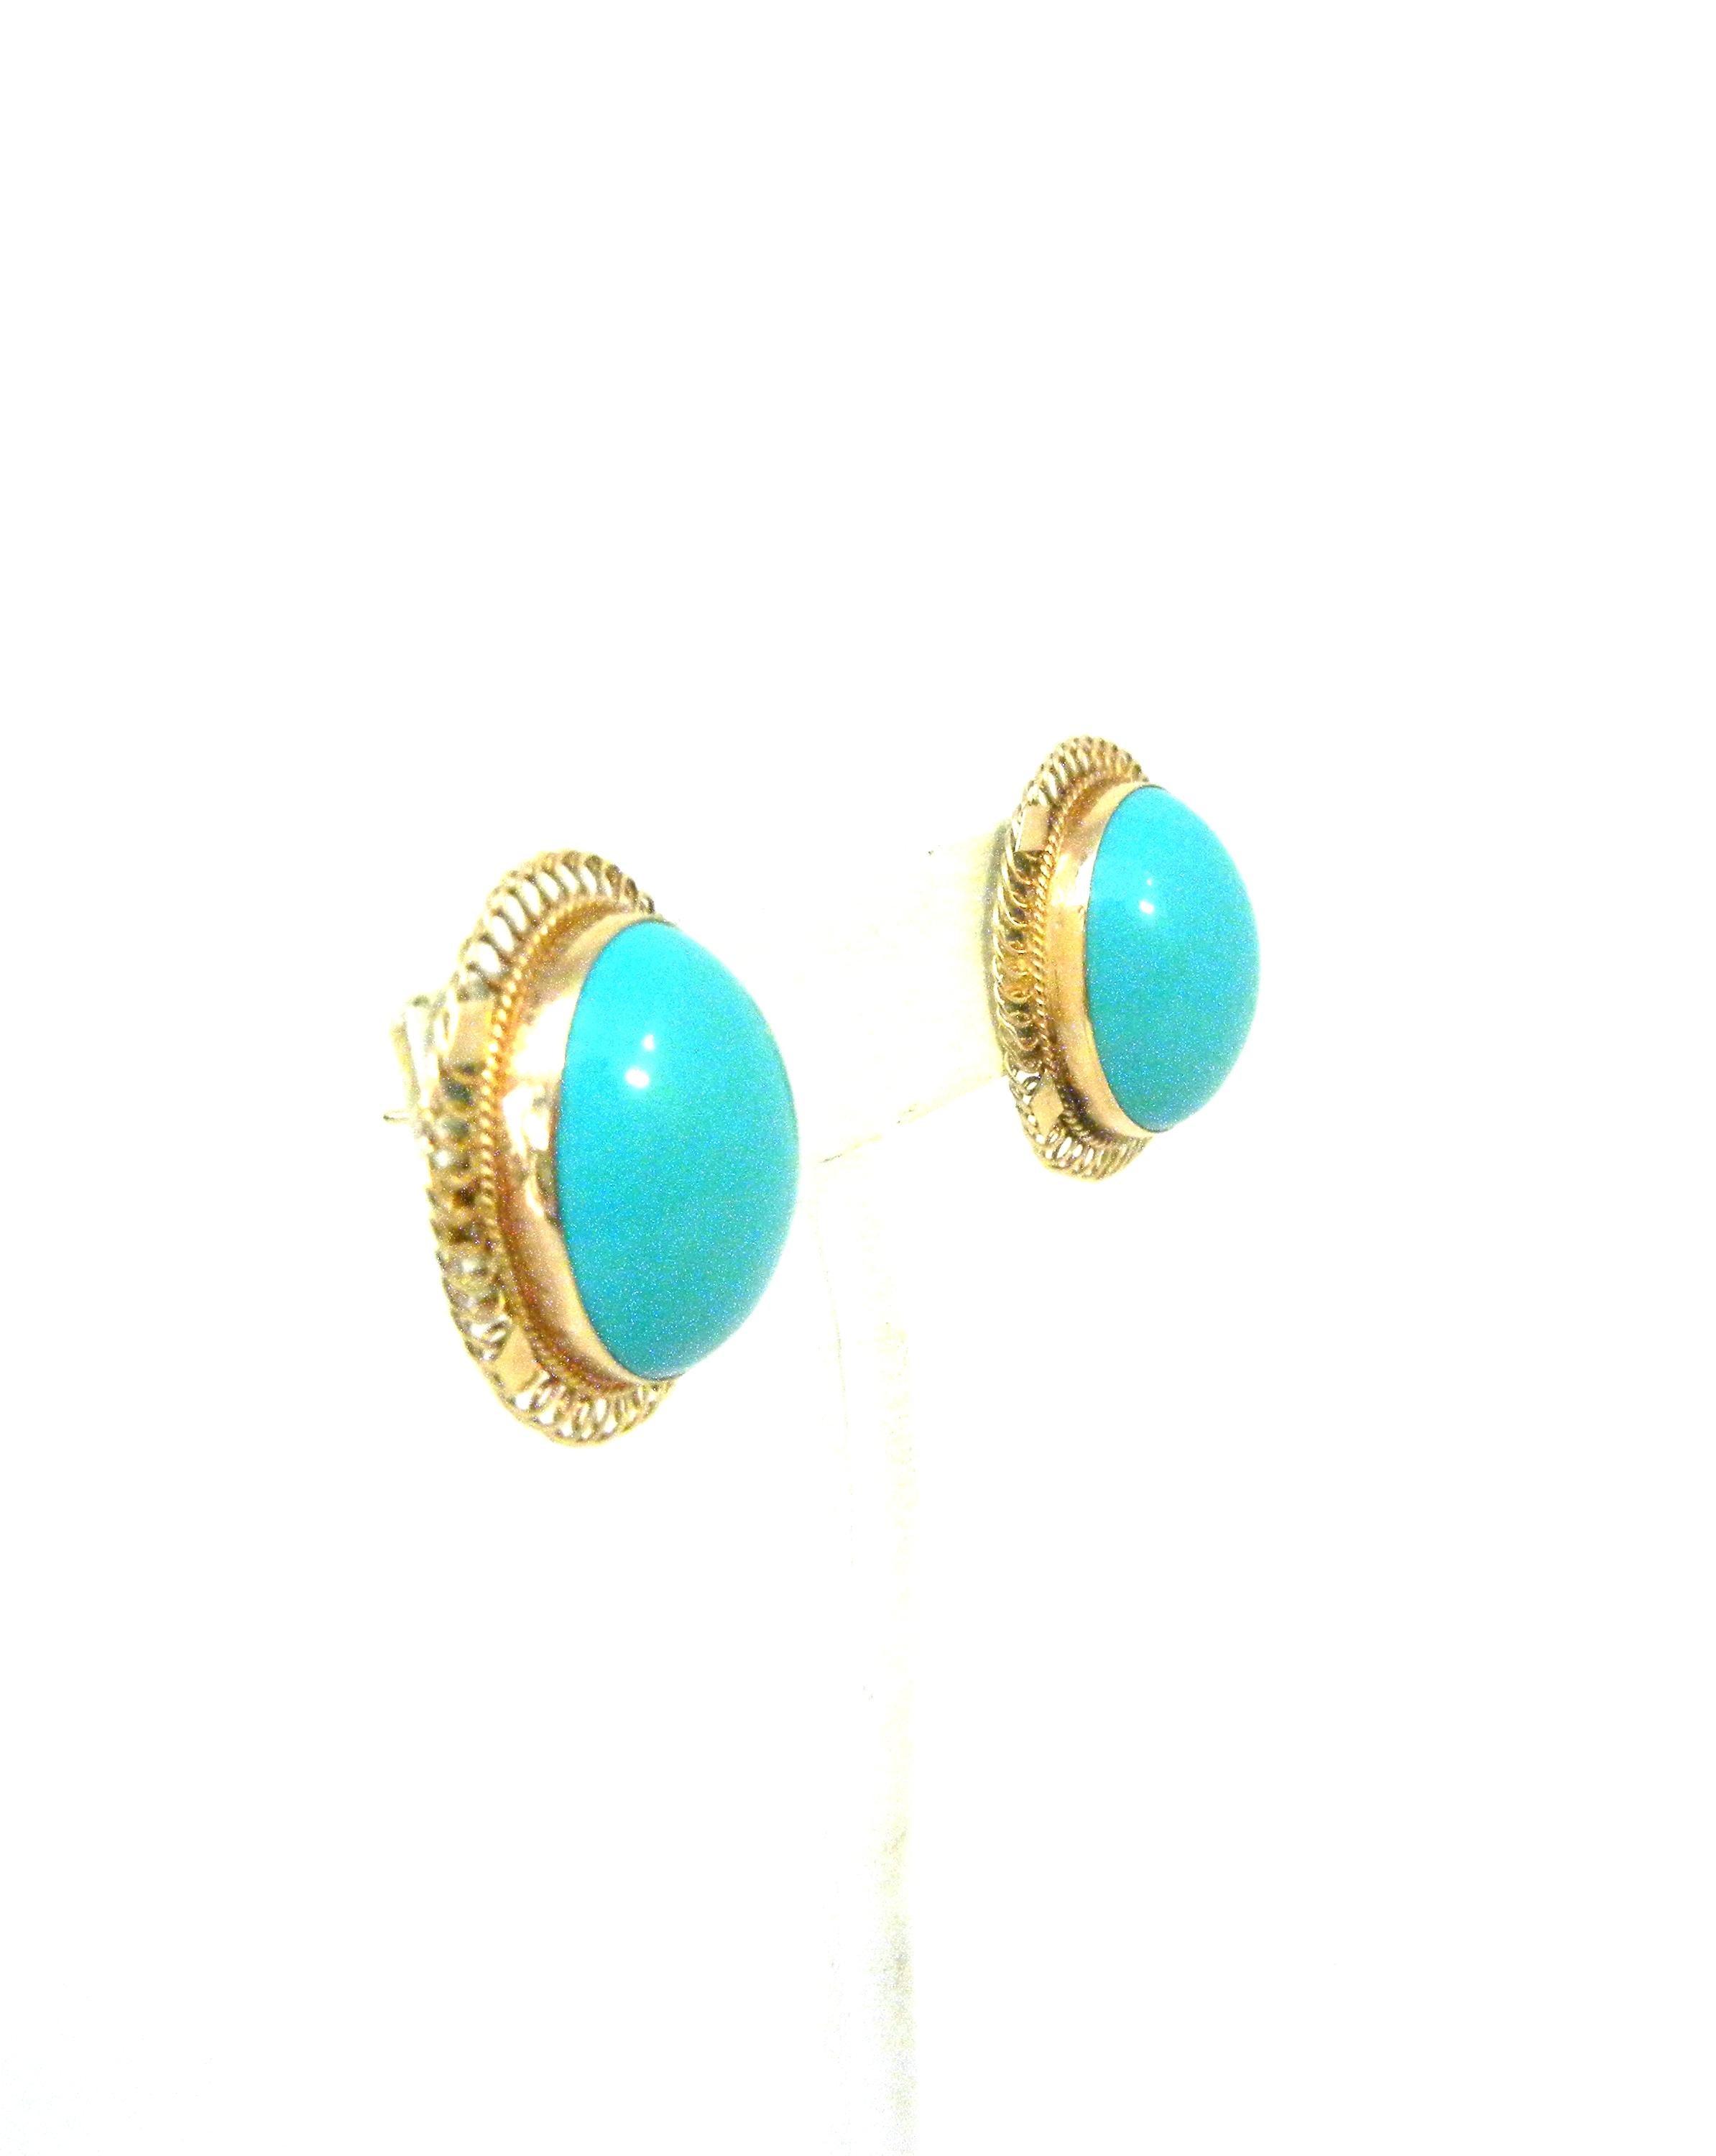 Persian Turquoise has an unmistakable hue!  Rich, warm and forever in style.  These fantastic pierced earrings feature impressive 14mmx20mm oval cabochon stones bezel set  and graced with open work frames.  Perfect from day to evening.  Must be